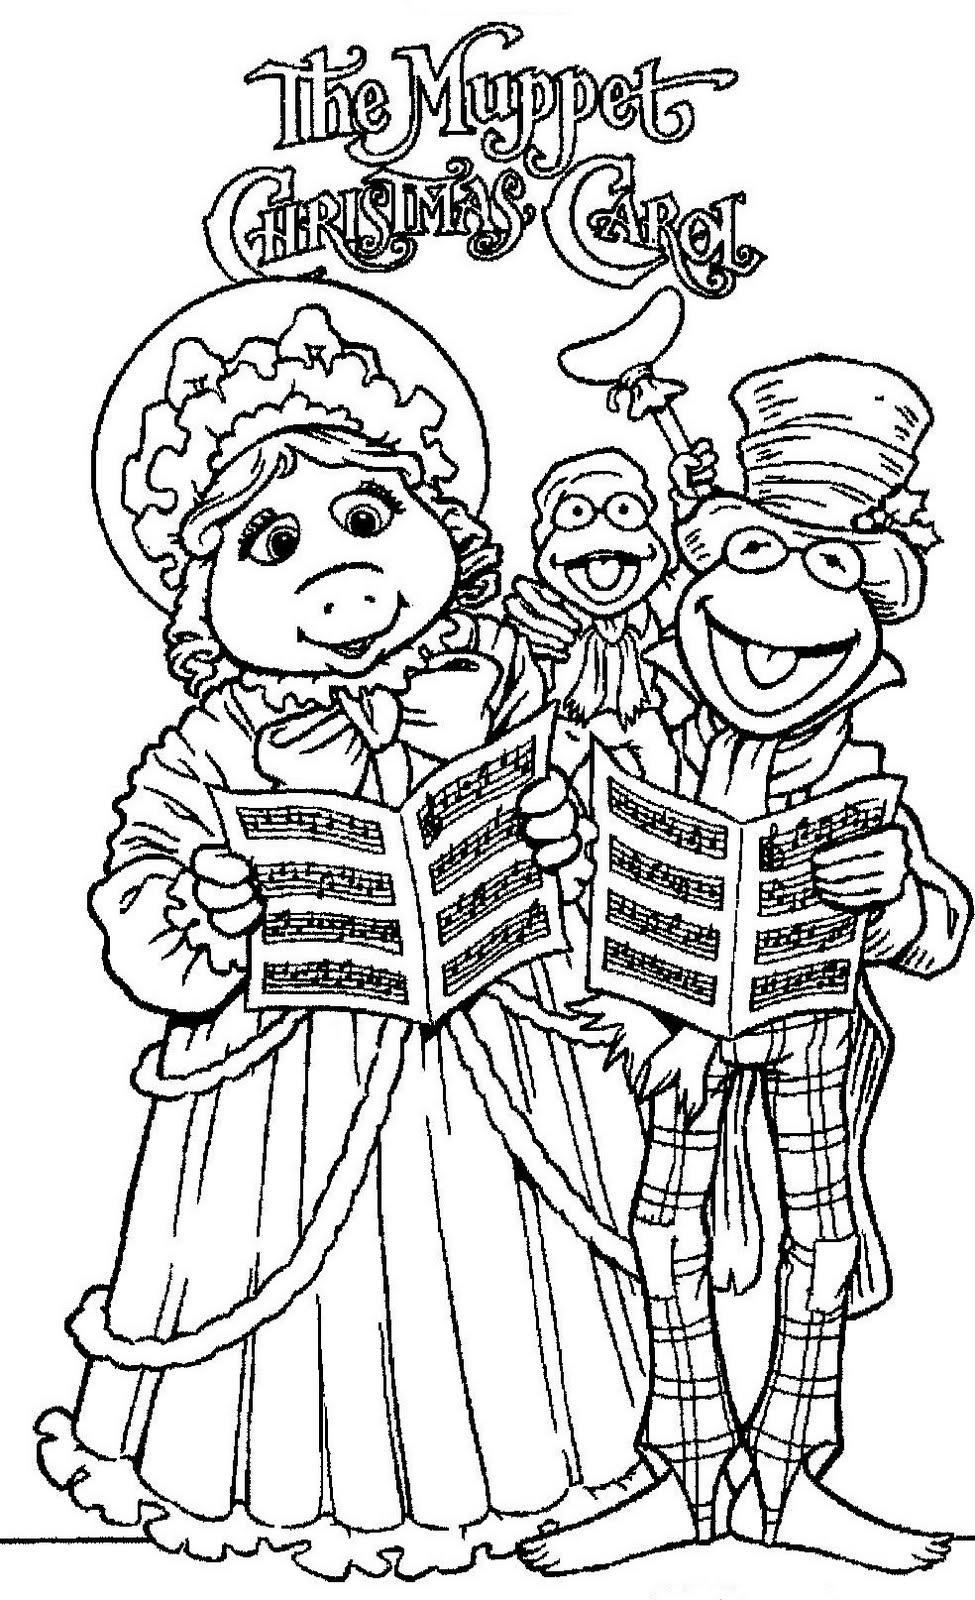 Muppet Christmas Carol Coloring Pages